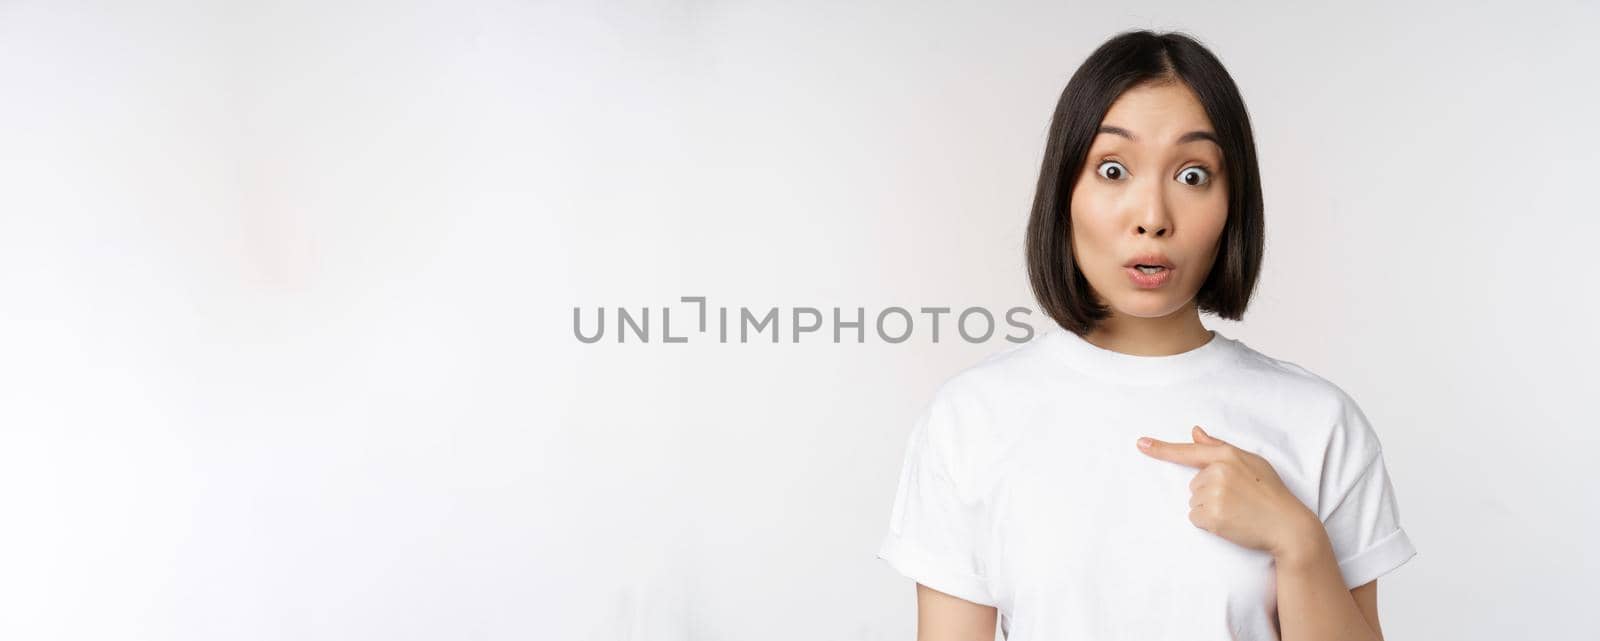 Portrait of surprised asian girl student, pointing finger left, raising eyebrows amazed, impressed by big deal, offer ahead, standing over white background.